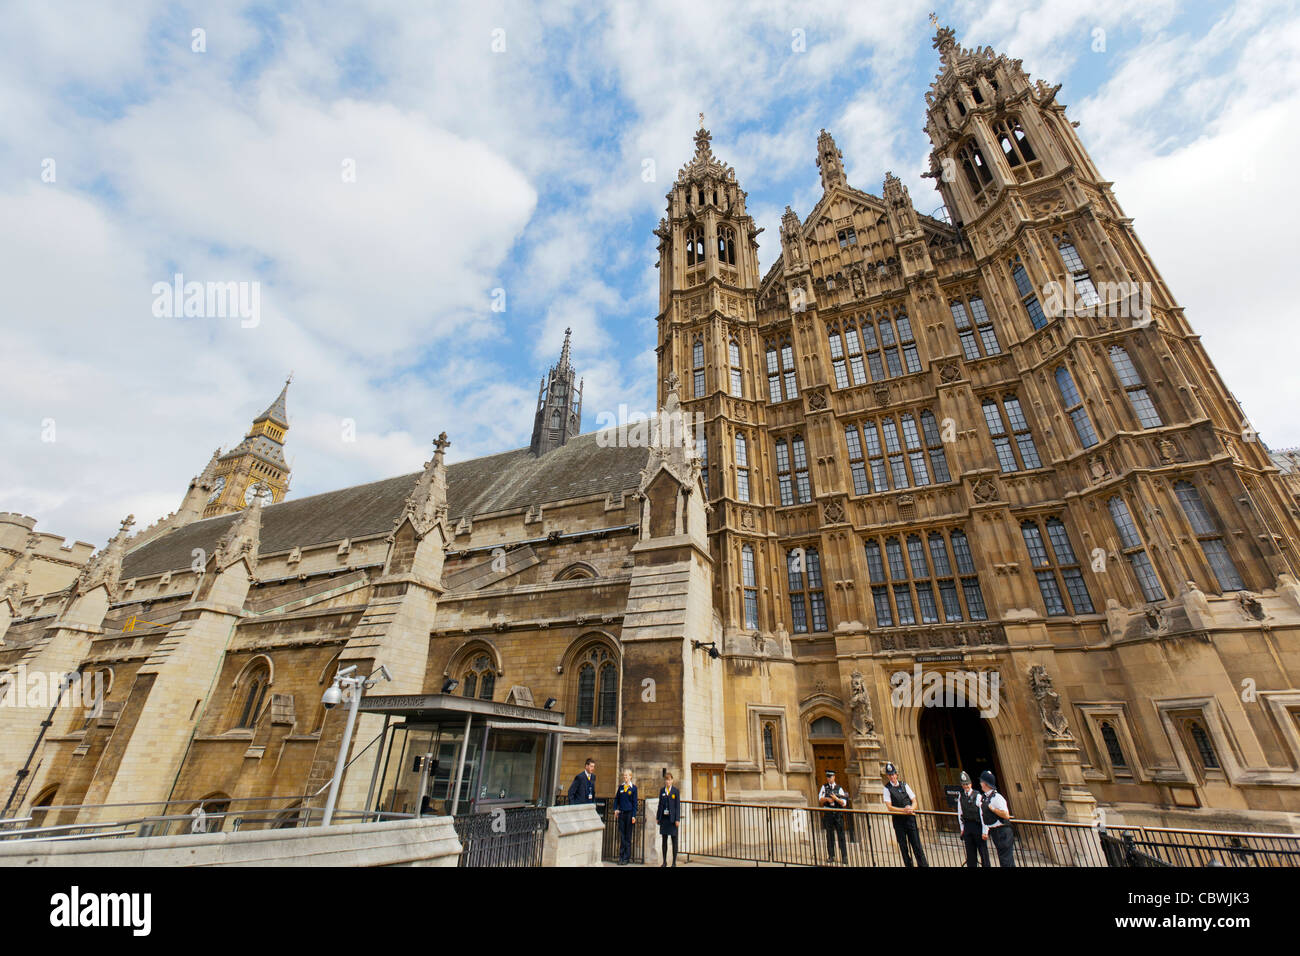 View of Houses of Parliament from Abingdon Street with police in view. Stock Photo